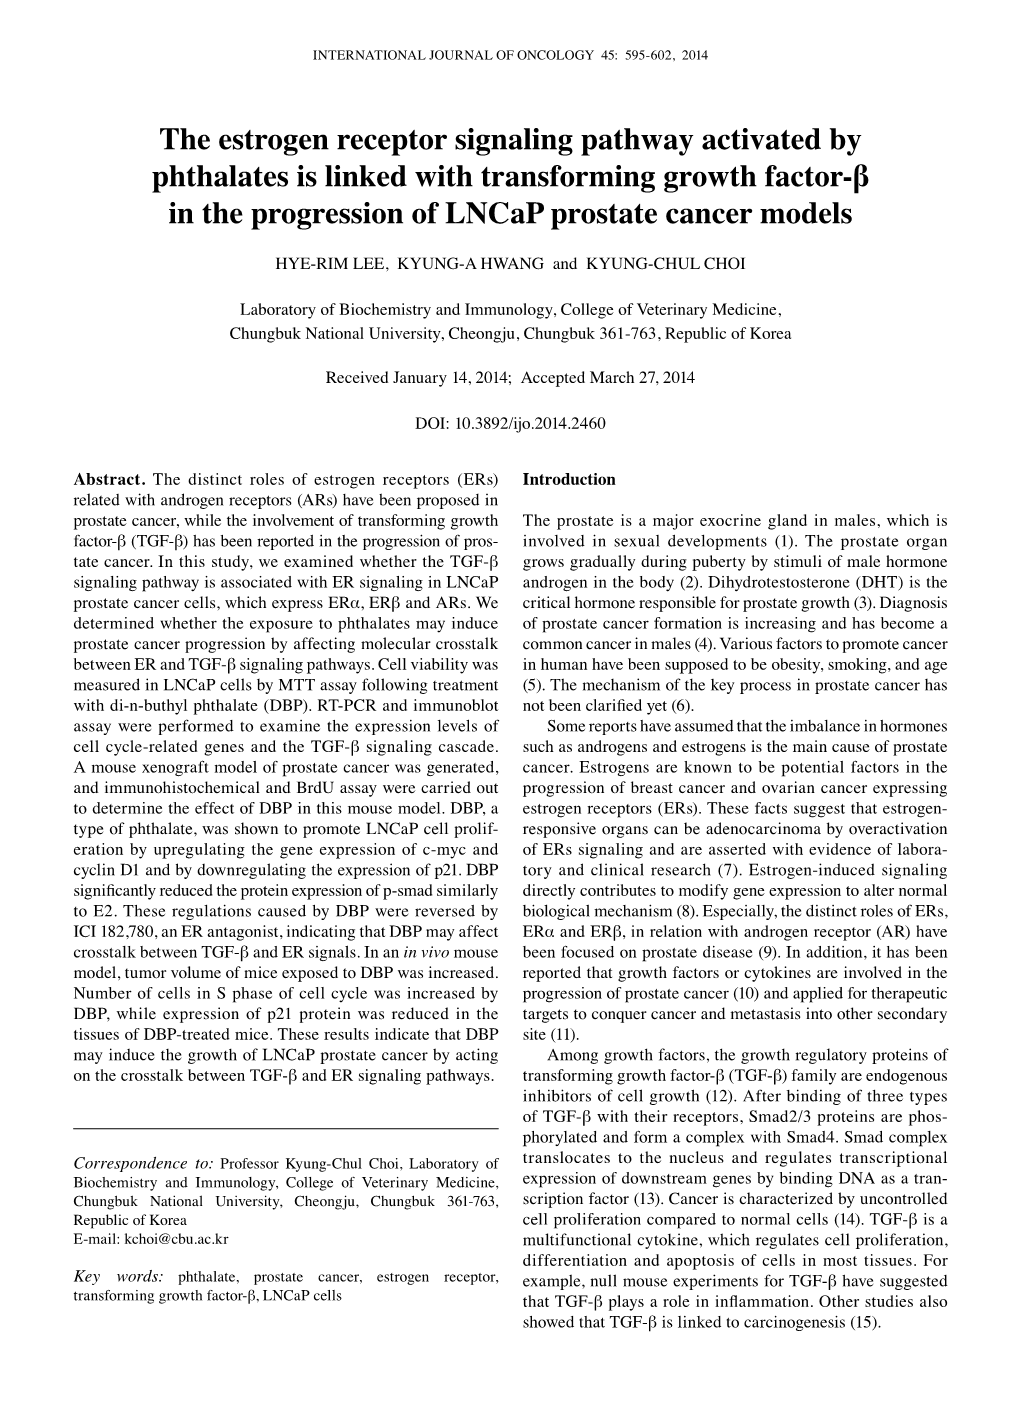 The Estrogen Receptor Signaling Pathway Activated by Phthalates Is Linked with Transforming Growth Factor-Β in the Progression of Lncap Prostate Cancer Models